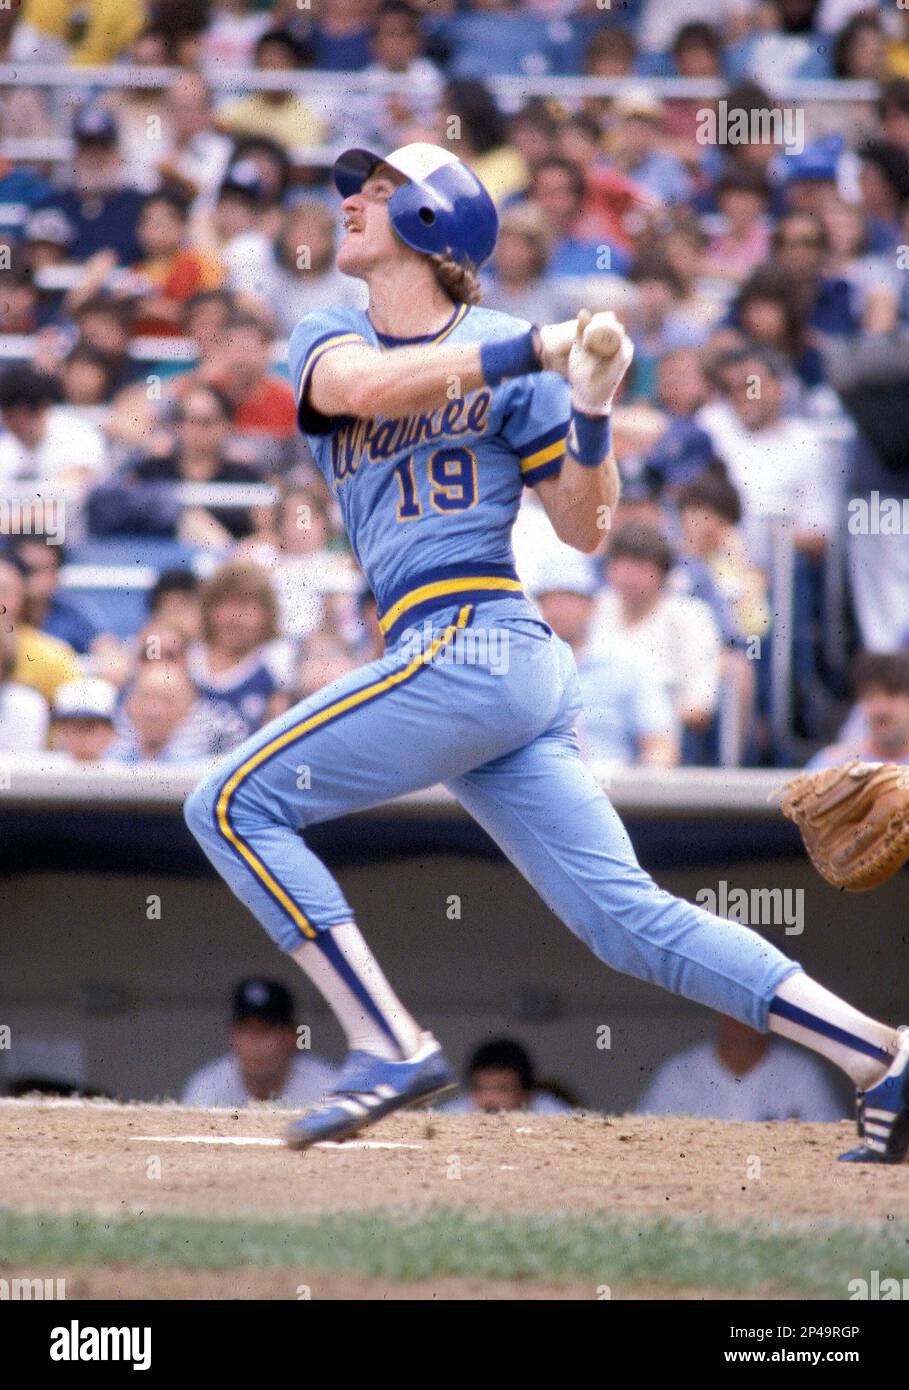 robin yount hall of fame